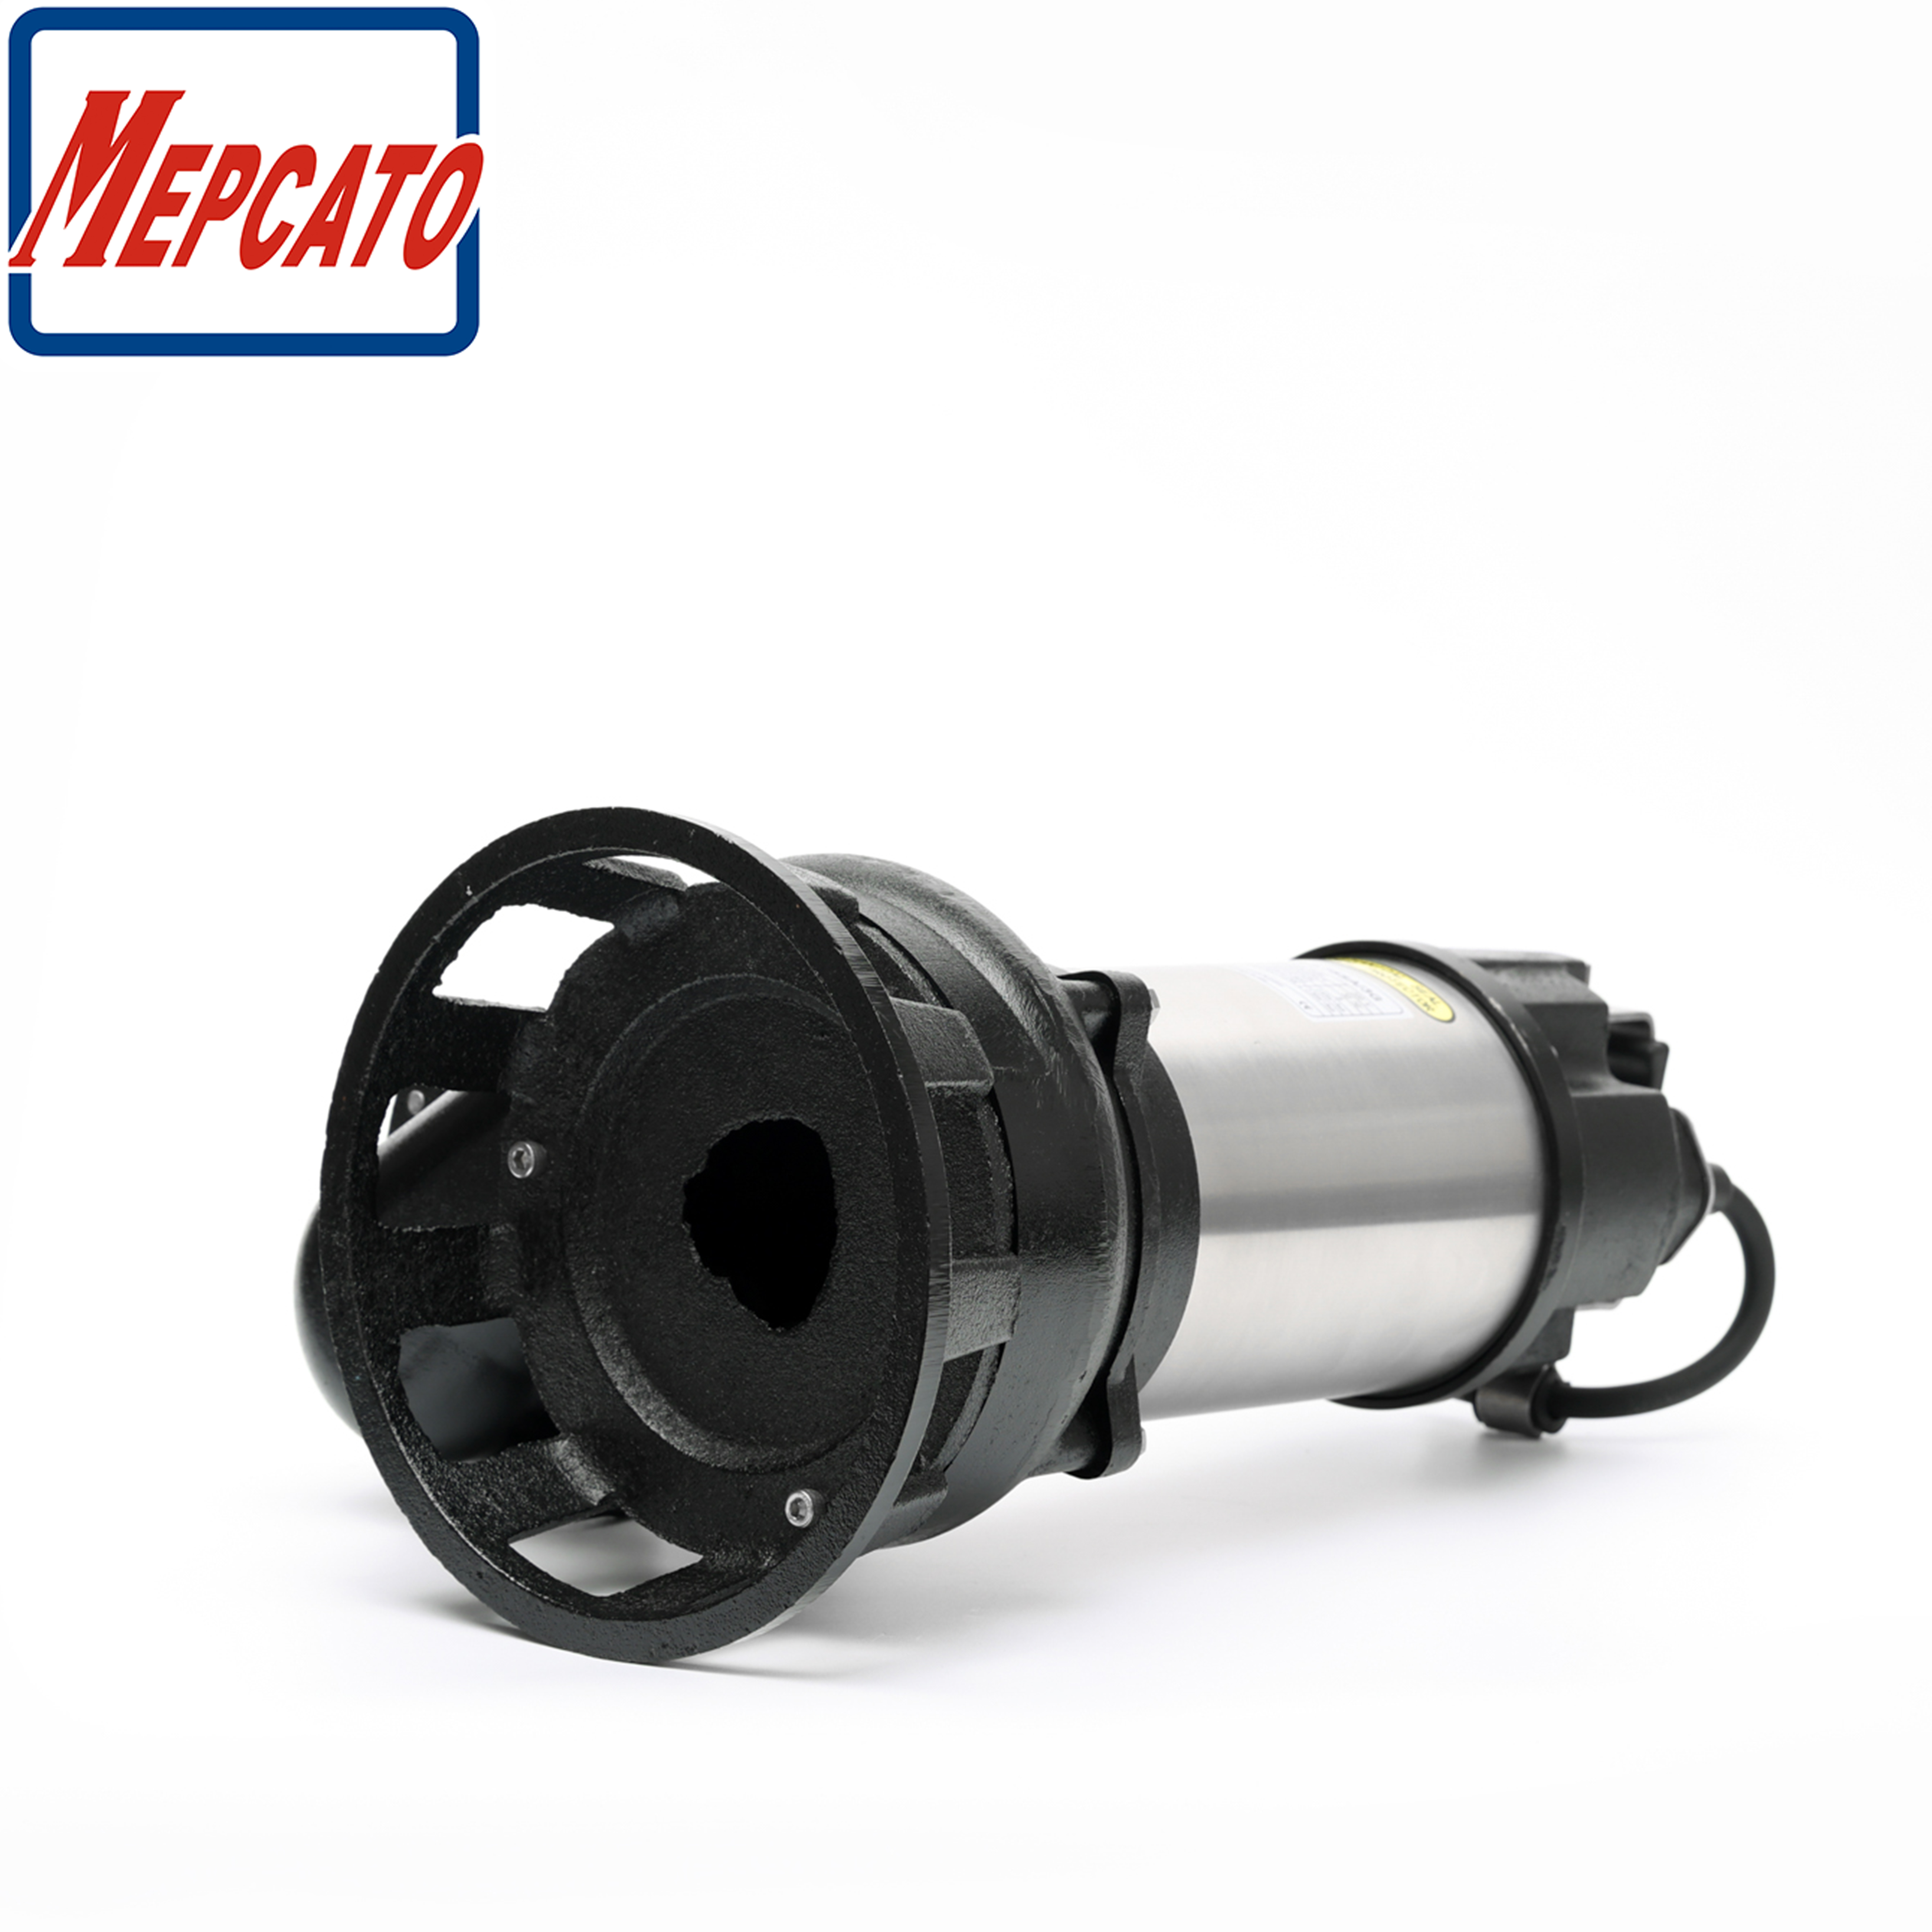 Large Flow Sewage Cutting Cast Iron Electric Submersible Wastewater Discharge Pump with Cutter